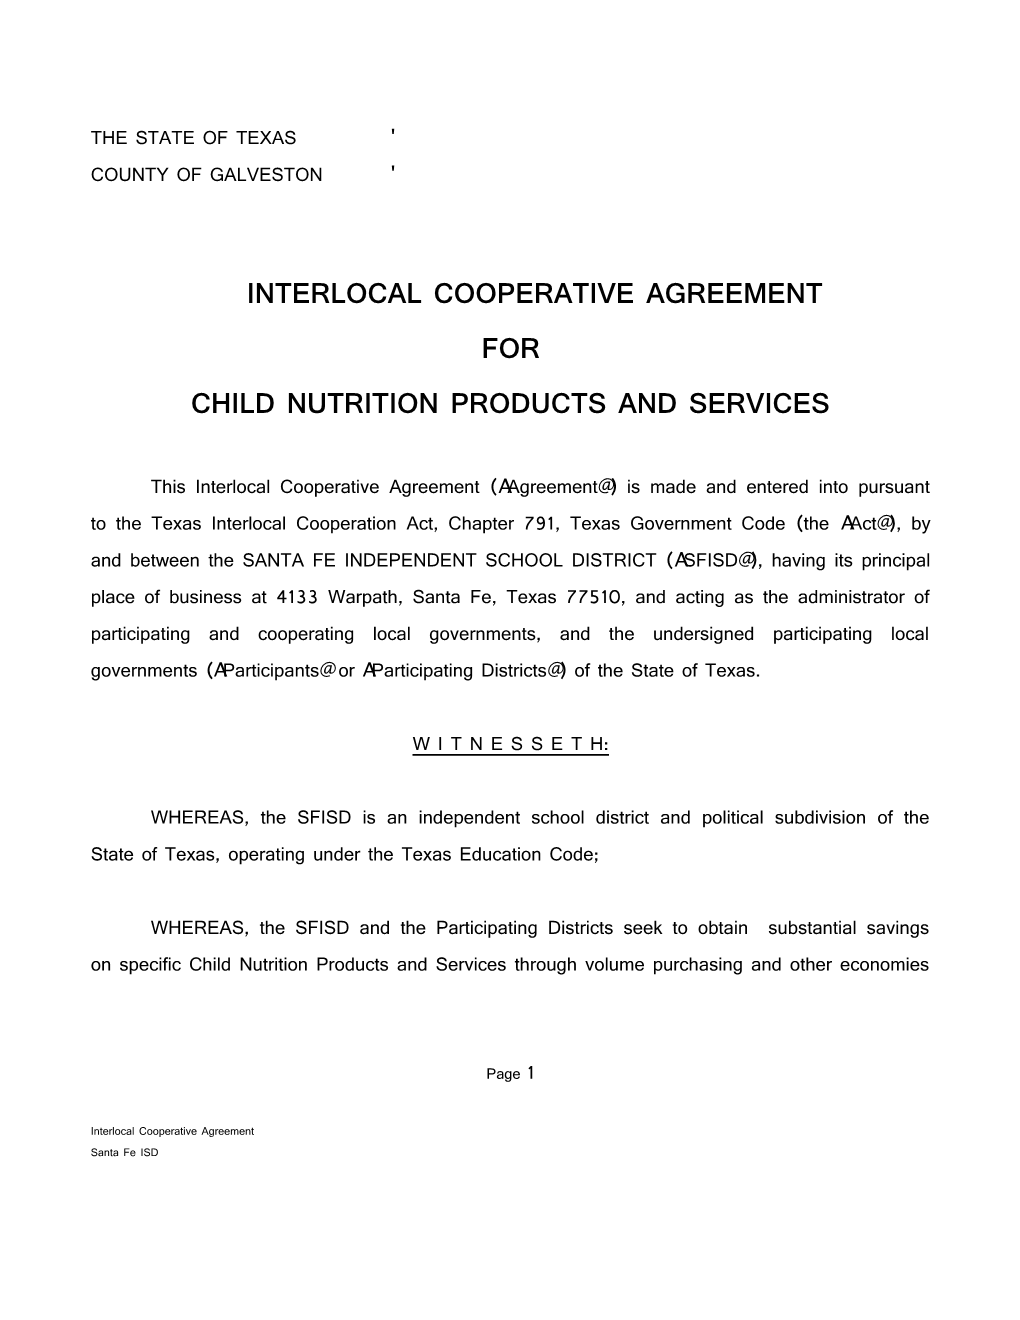 Child Nutrition Products and Services